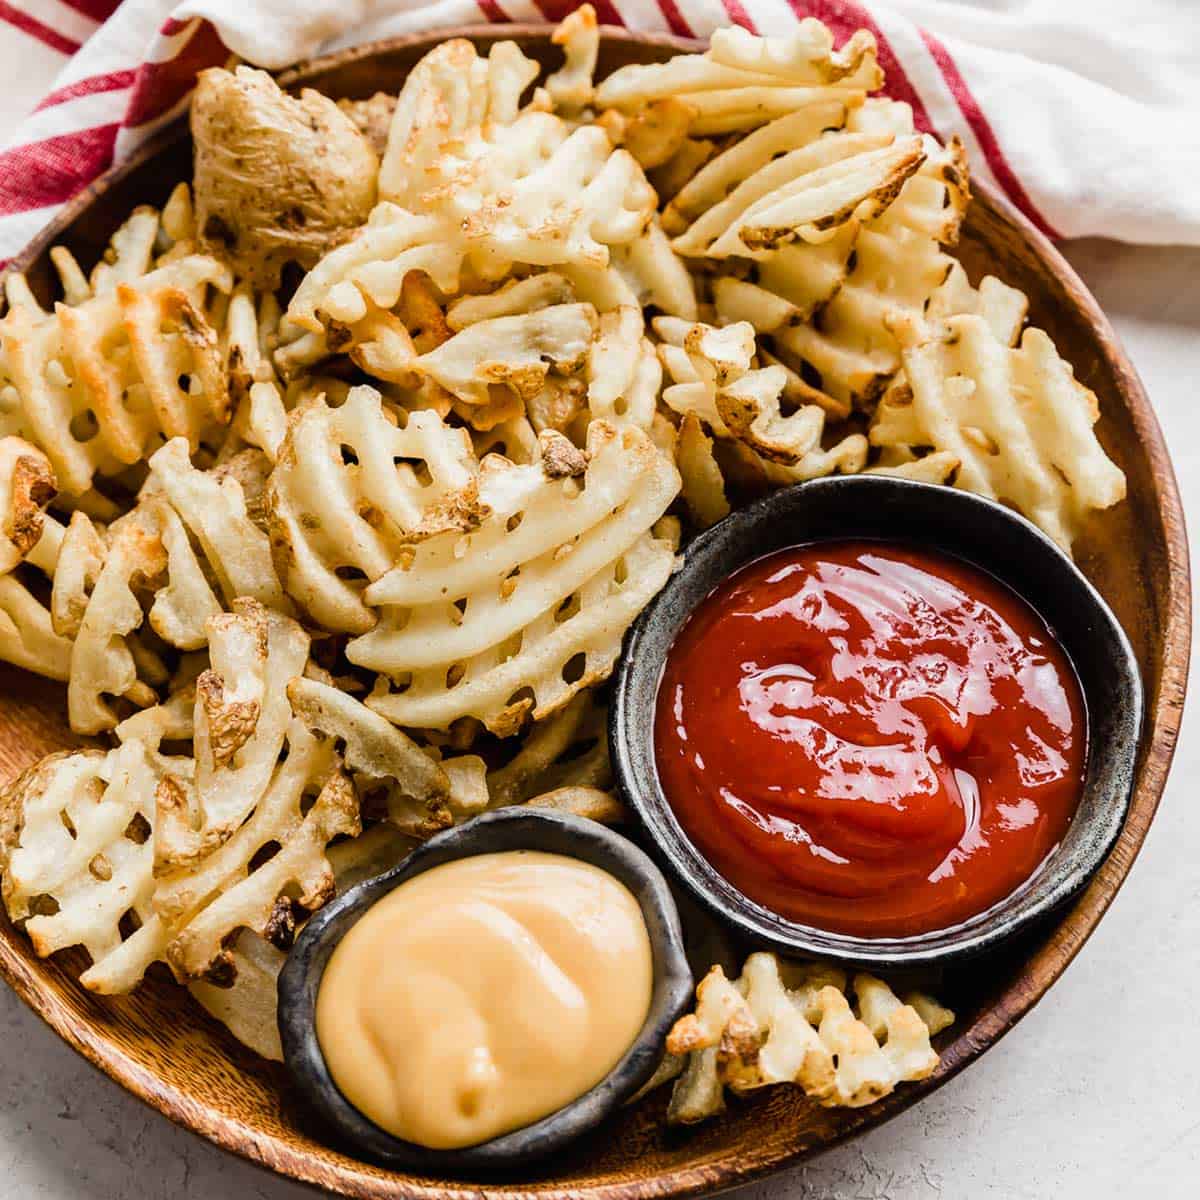 Waffle fries on a brown plate with bowls of ketchup and chick fil a sauce beside them.